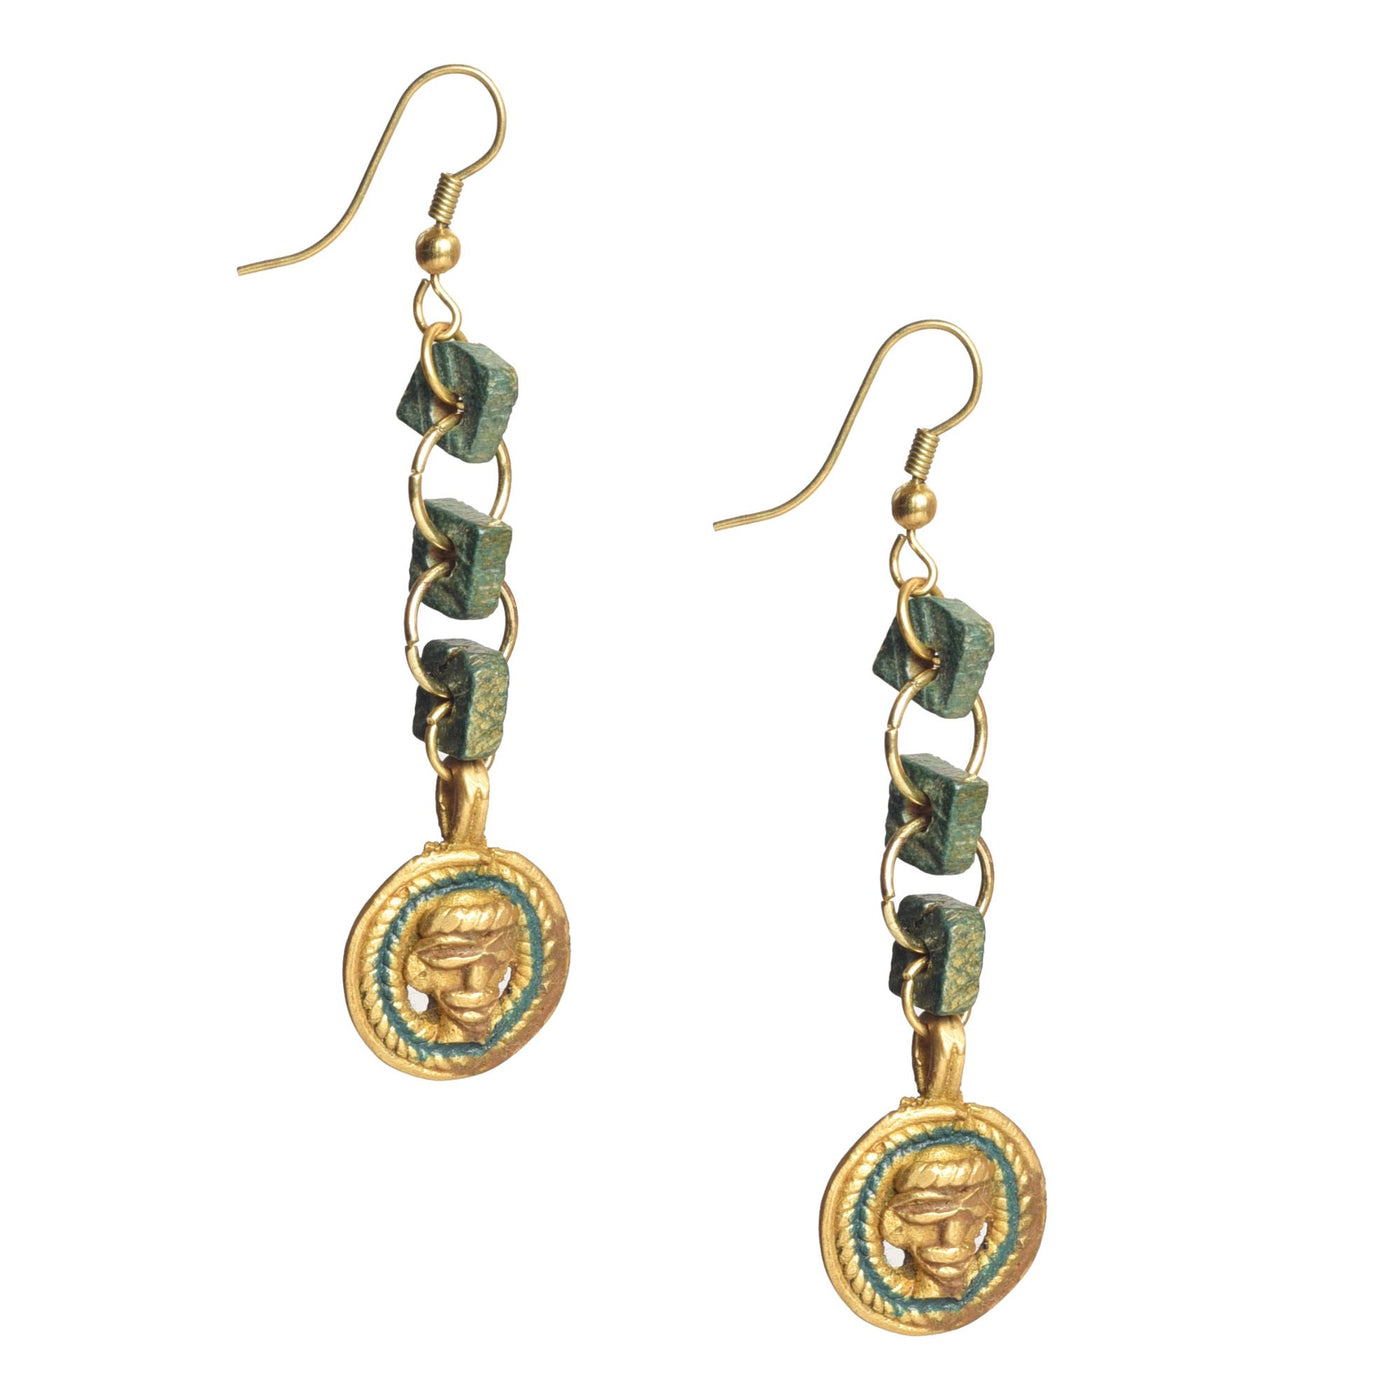 The Olive Queen Handcrafted Tribal Earrings - Fashion & Lifestyle - 3